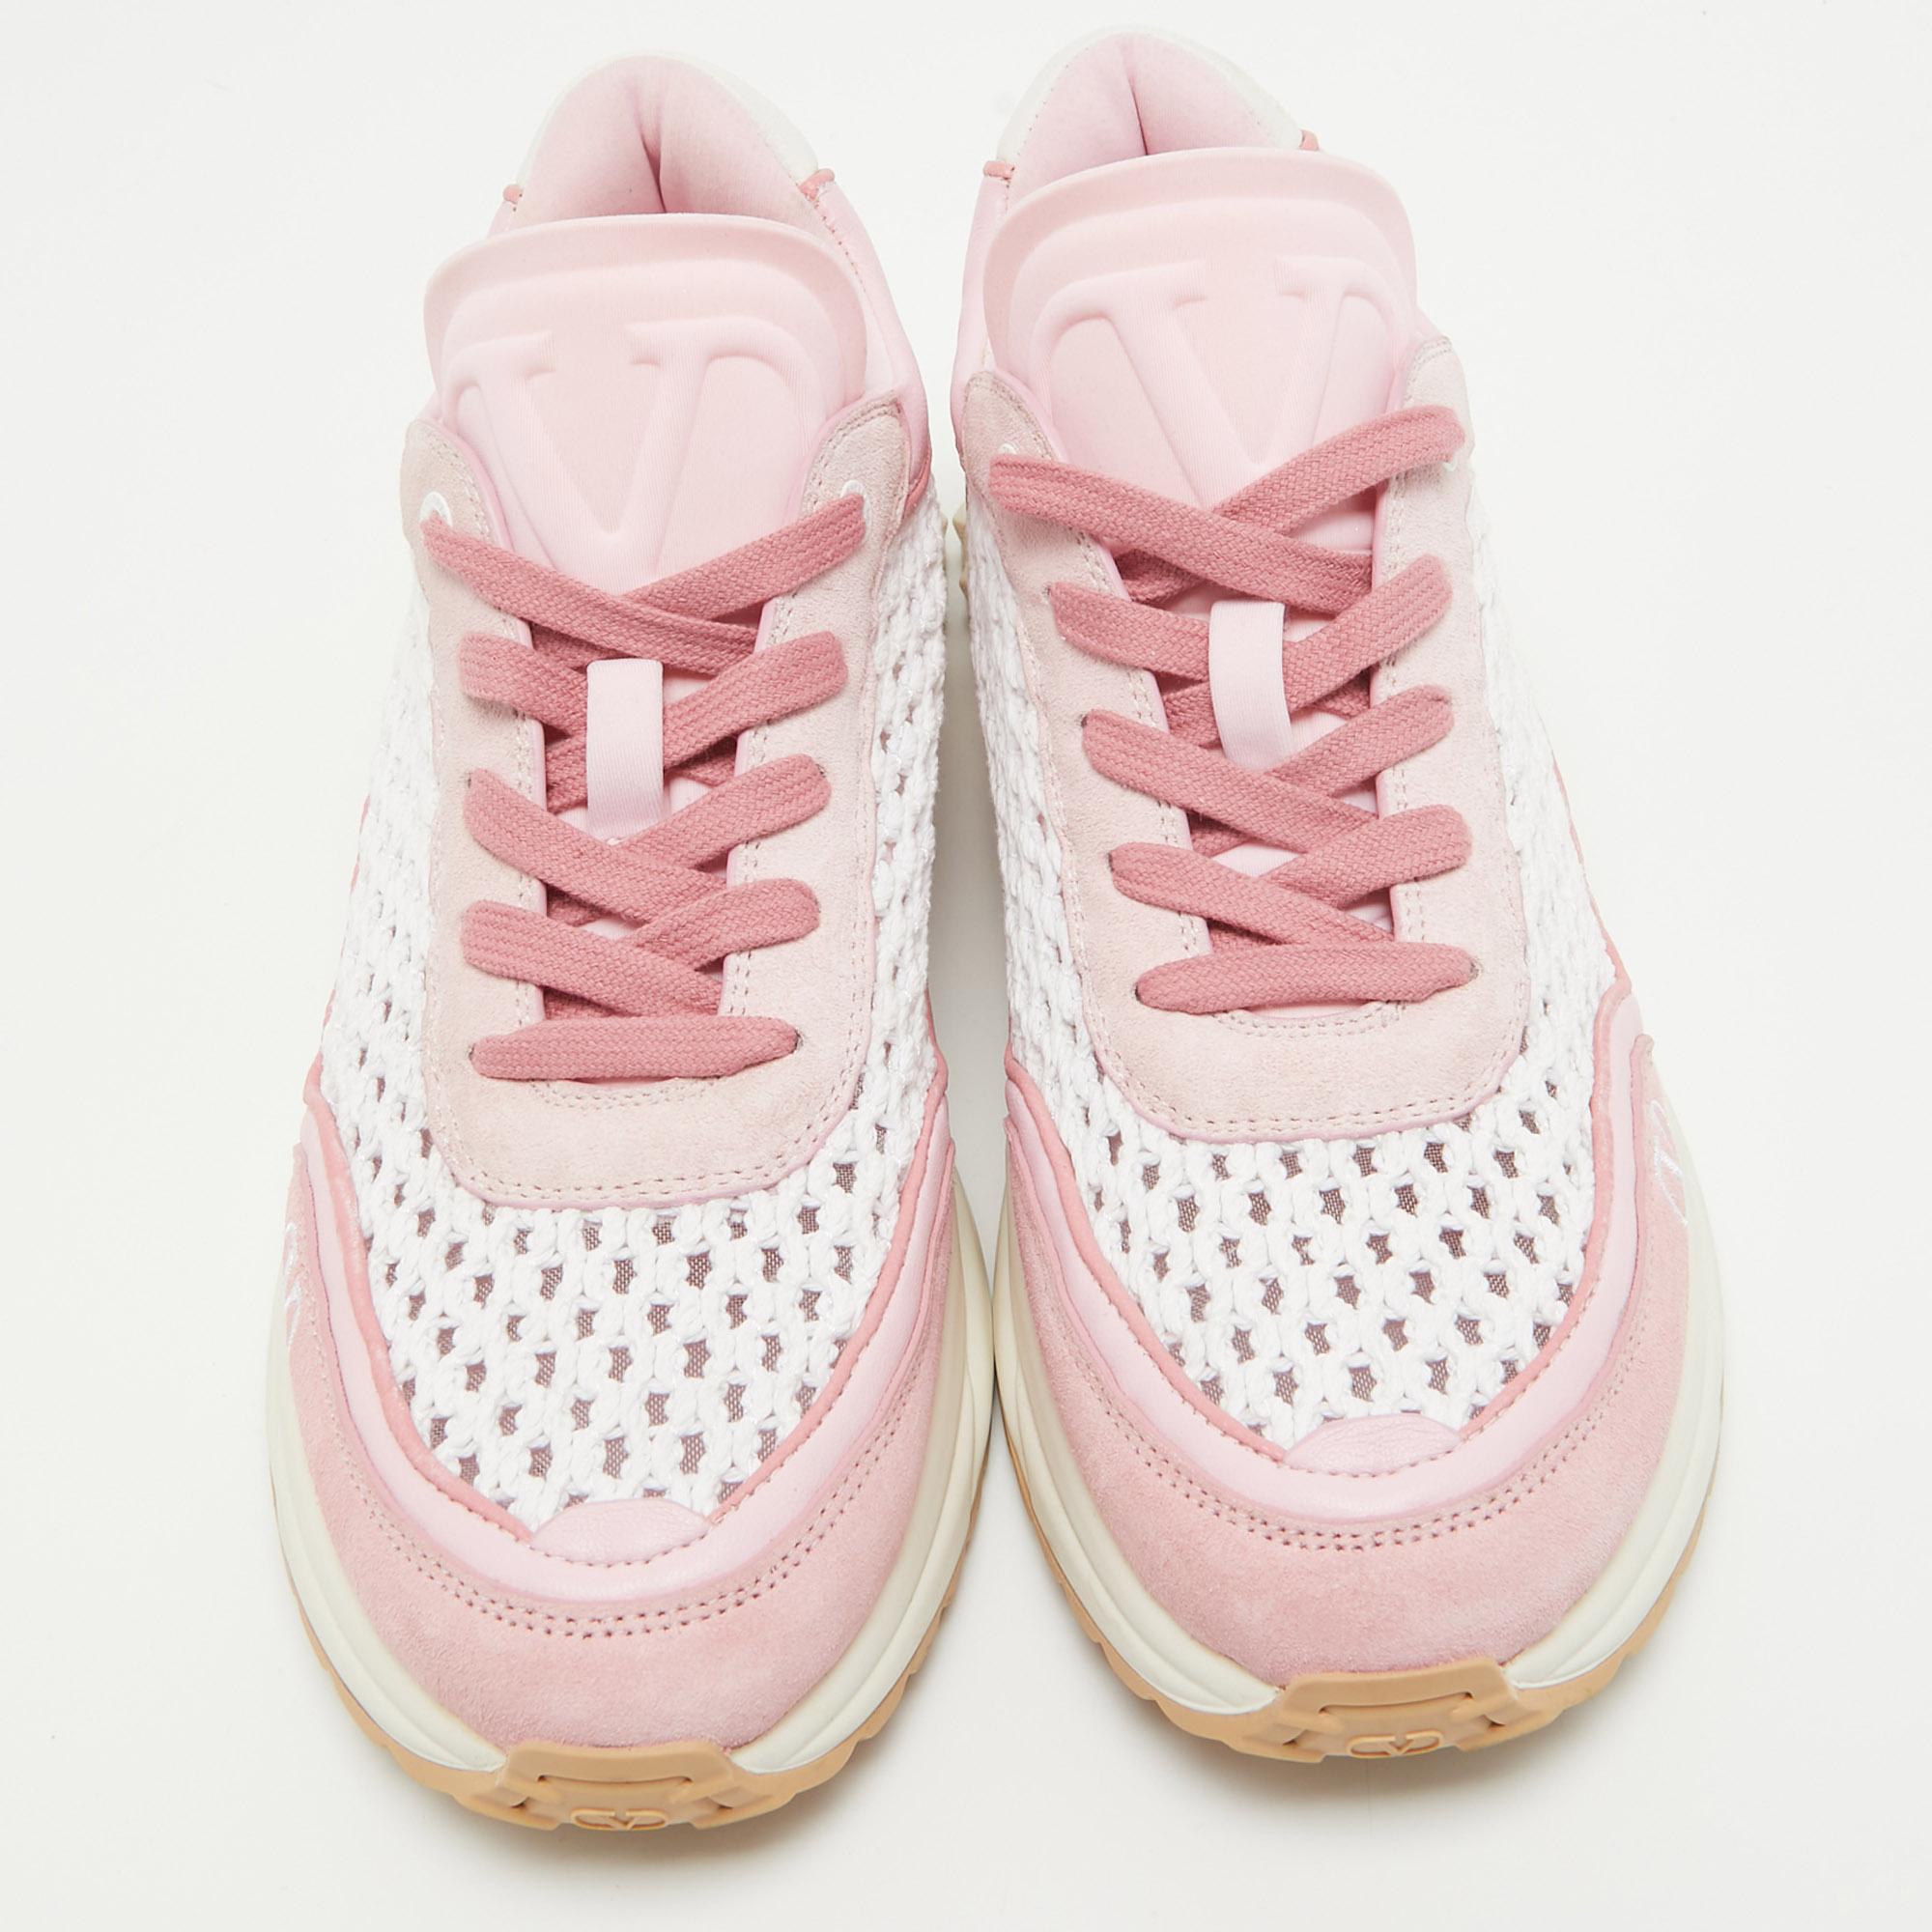 Valentino Pink/White Leather and Mesh Lace Up Sneakers Size 40 In Good Condition For Sale In Dubai, Al Qouz 2